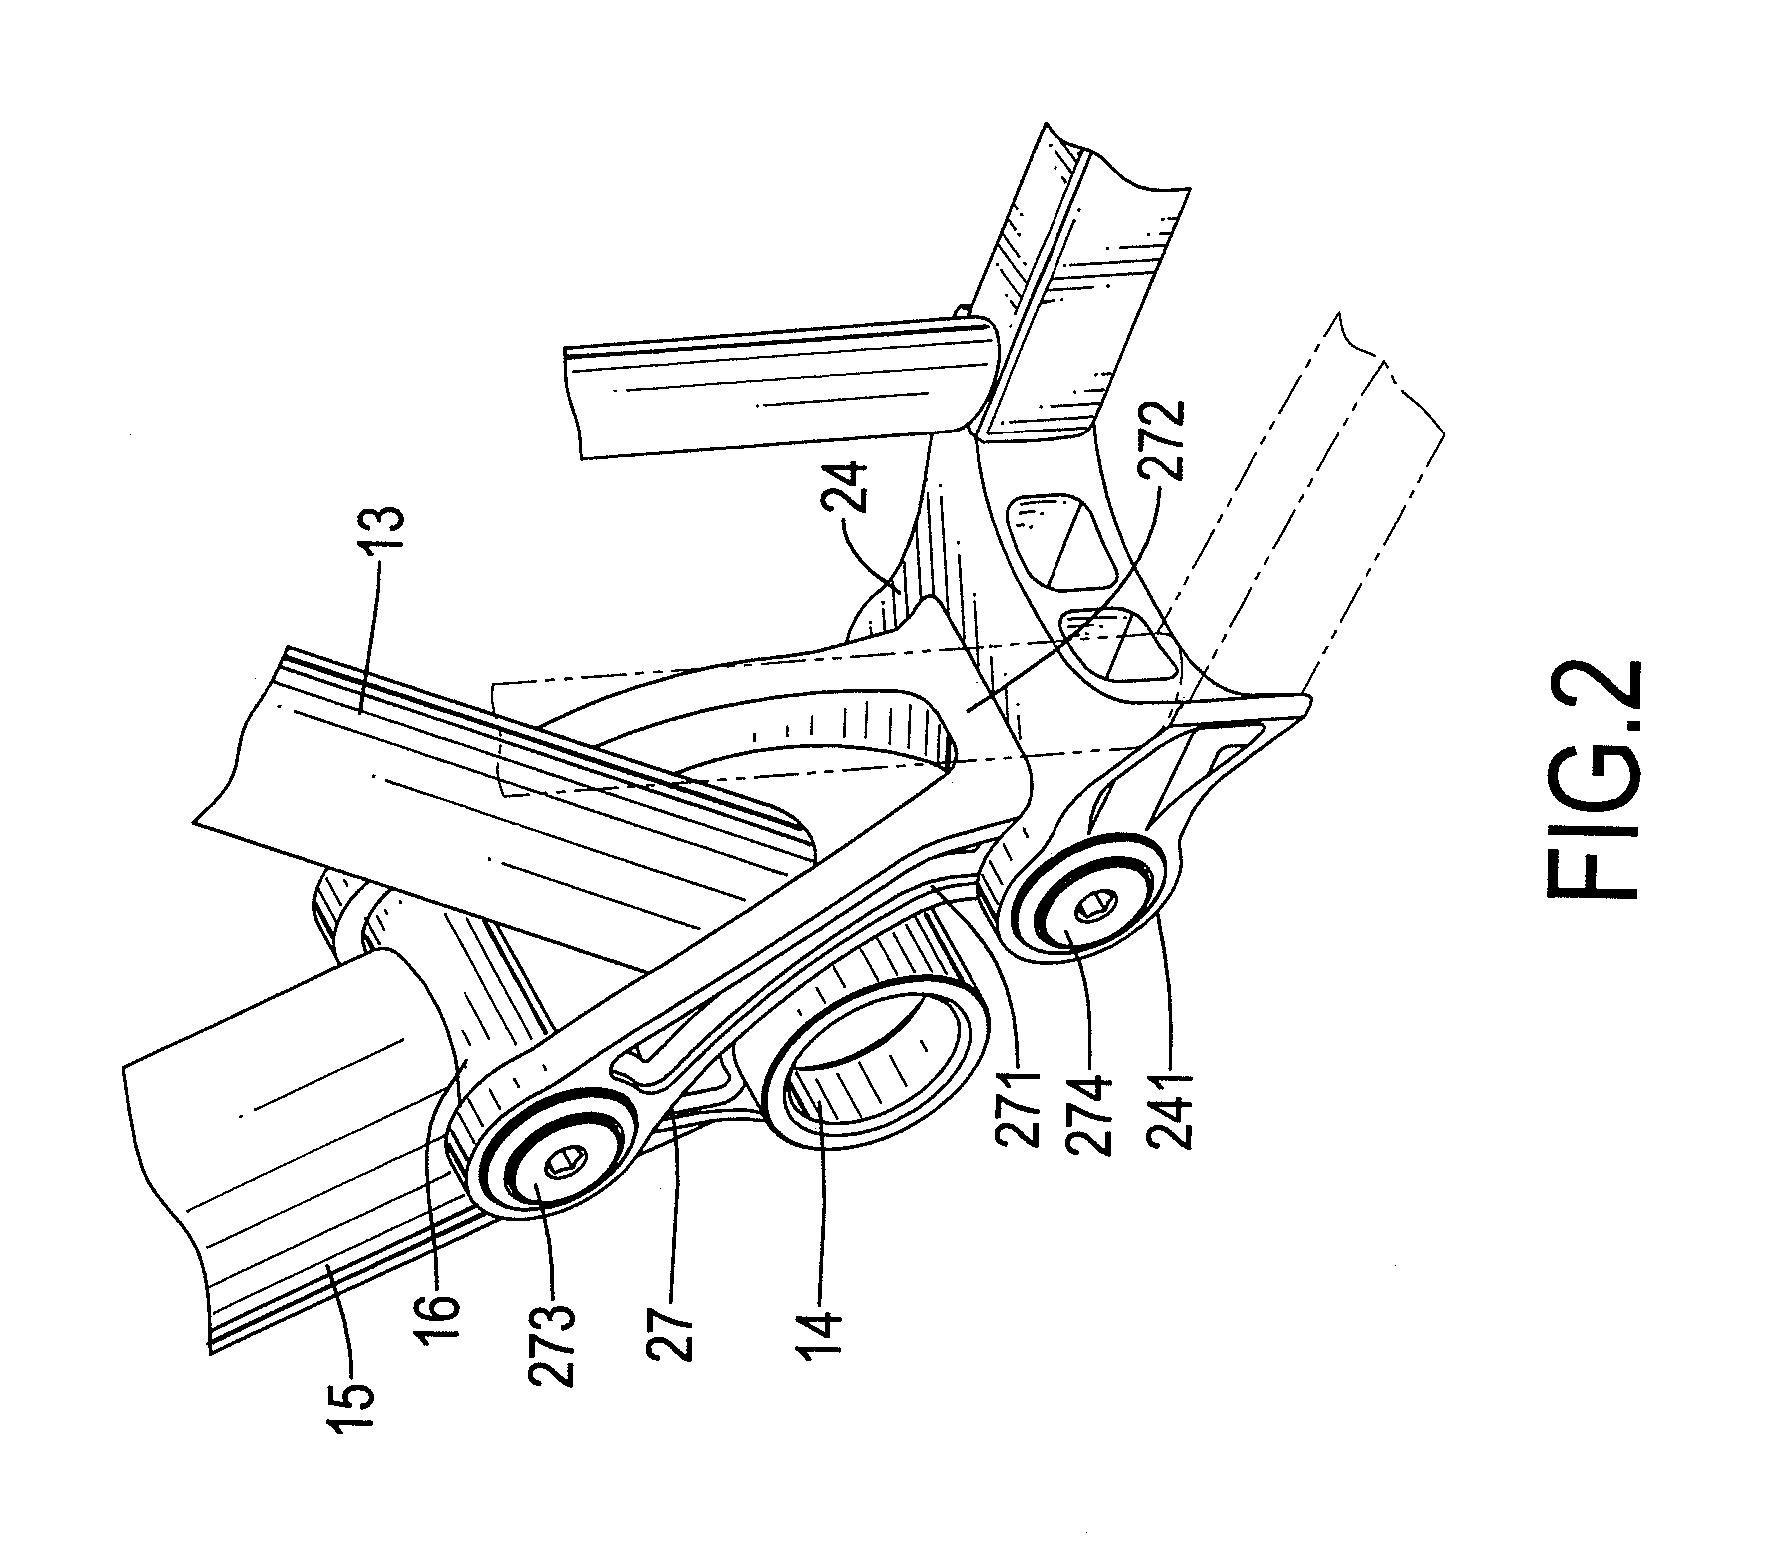 Bicycle frame with a counter-rotating four bar linkage system